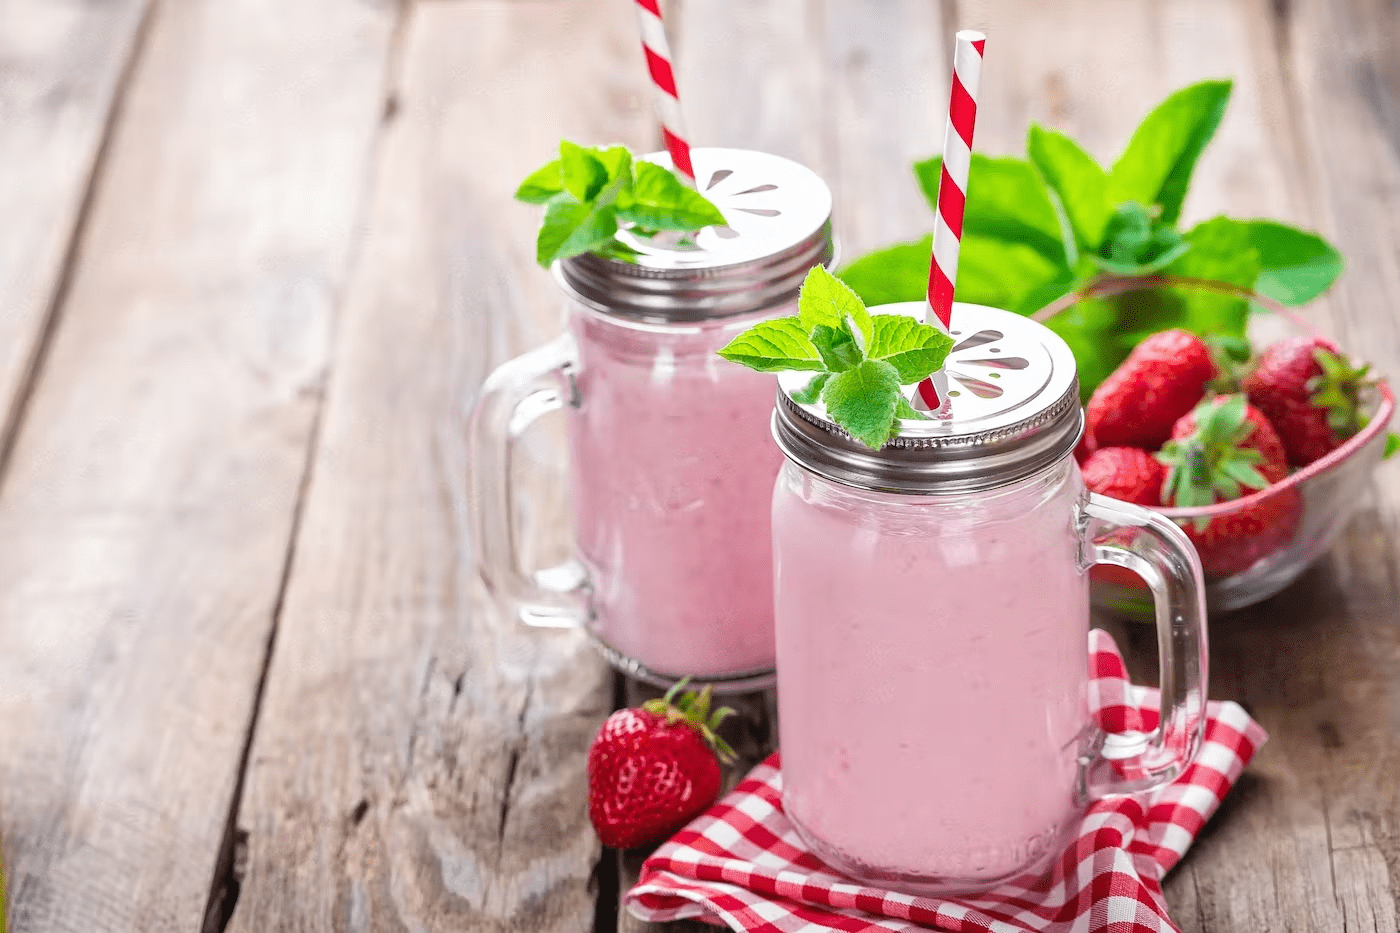 Start a Smoothie Business